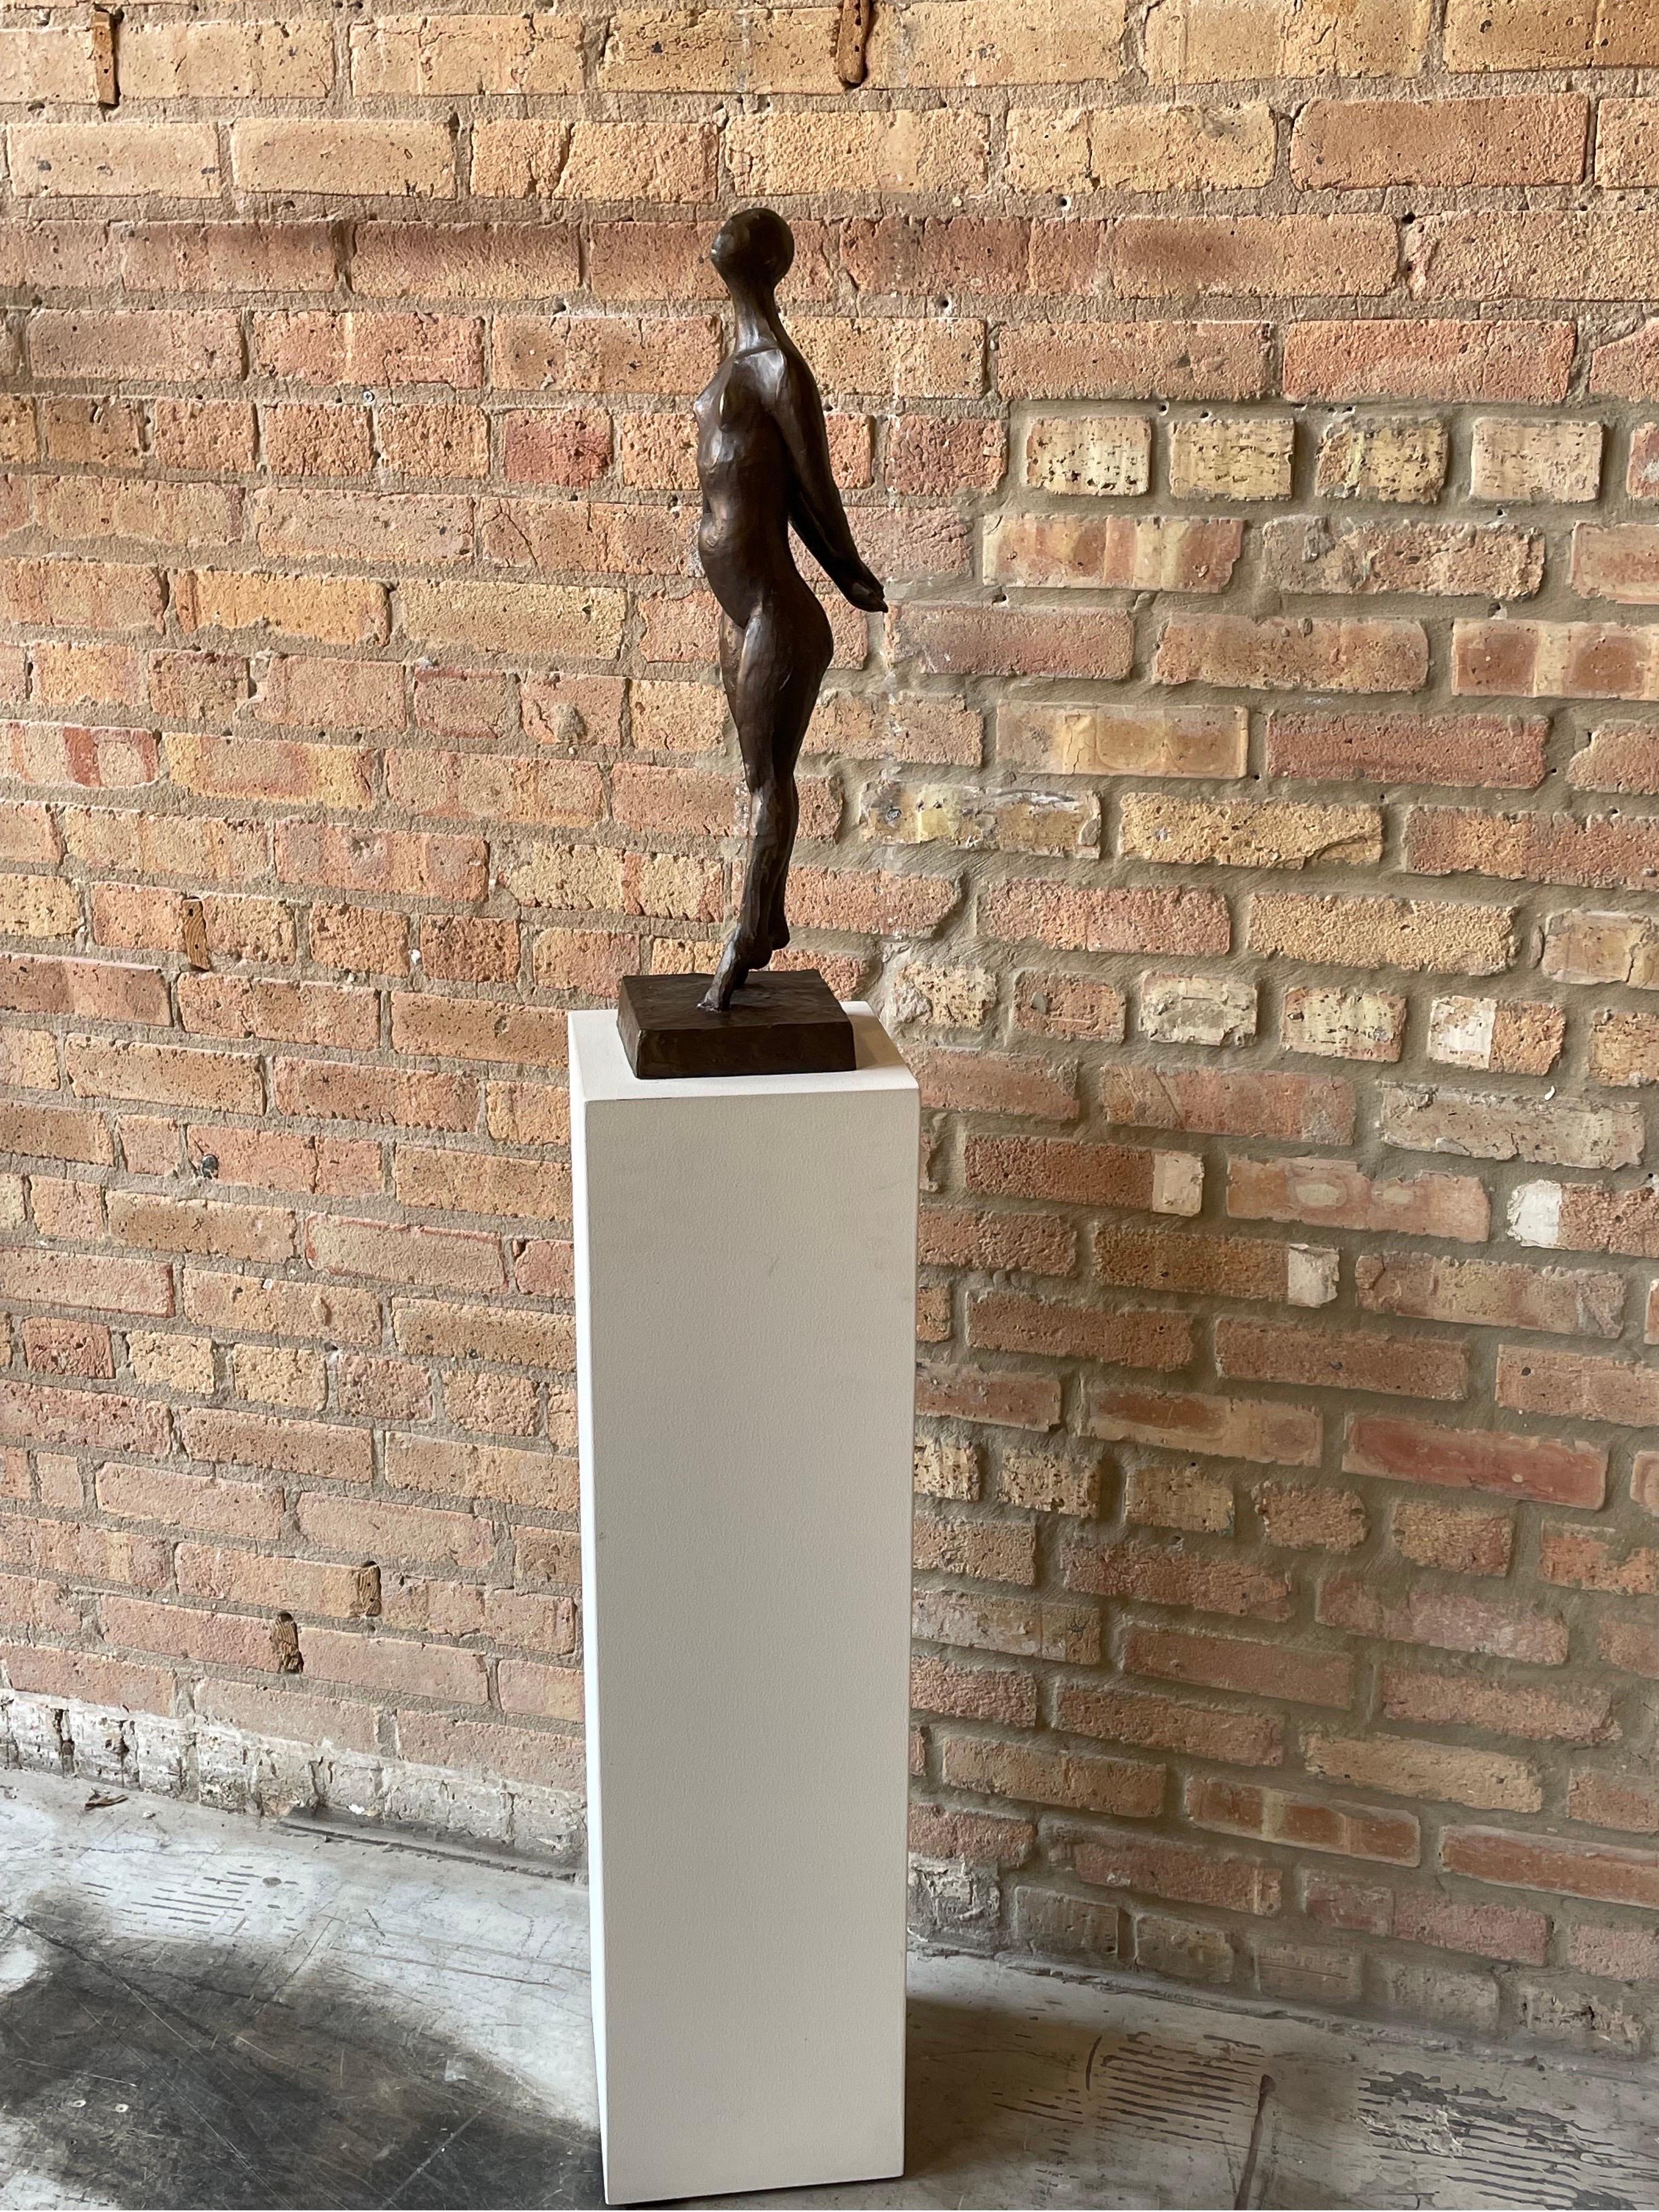 This is a lovely bronze sculpture titled “small dancer” 4/24 by Curt Brill in 1997
The sculpture was purchased in New Mexico.